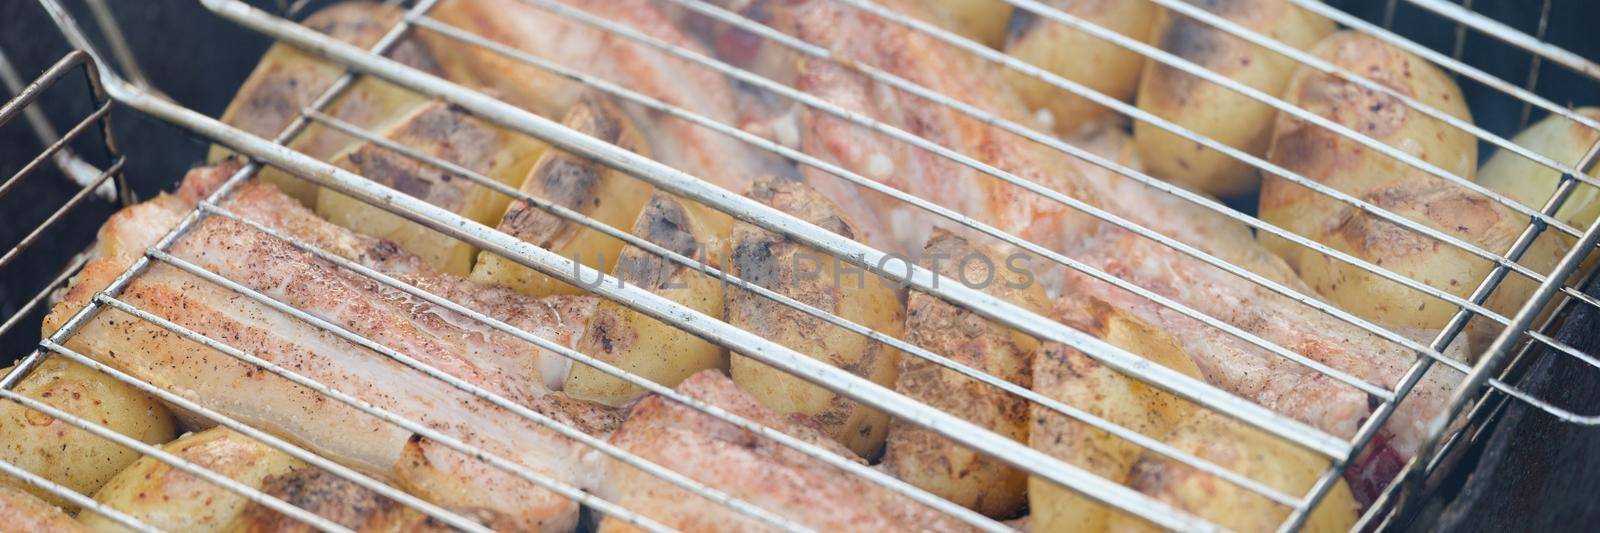 Raw vegetable and slices of meat cooking on grill outdoors by kuprevich